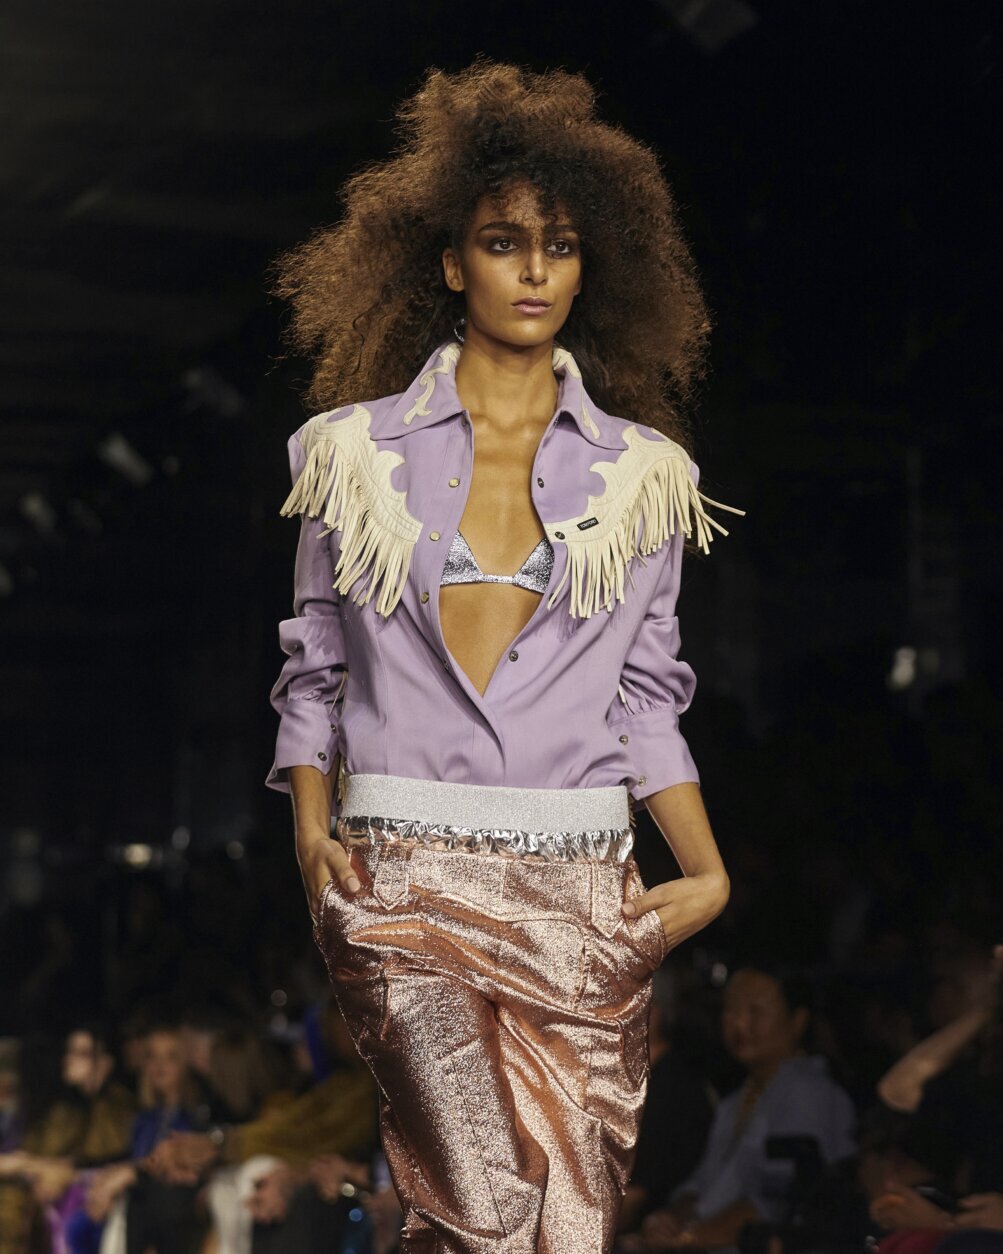 Tom Ford Closes Fashion Week With Big Hair, Miles of Sparkle - Bloomberg